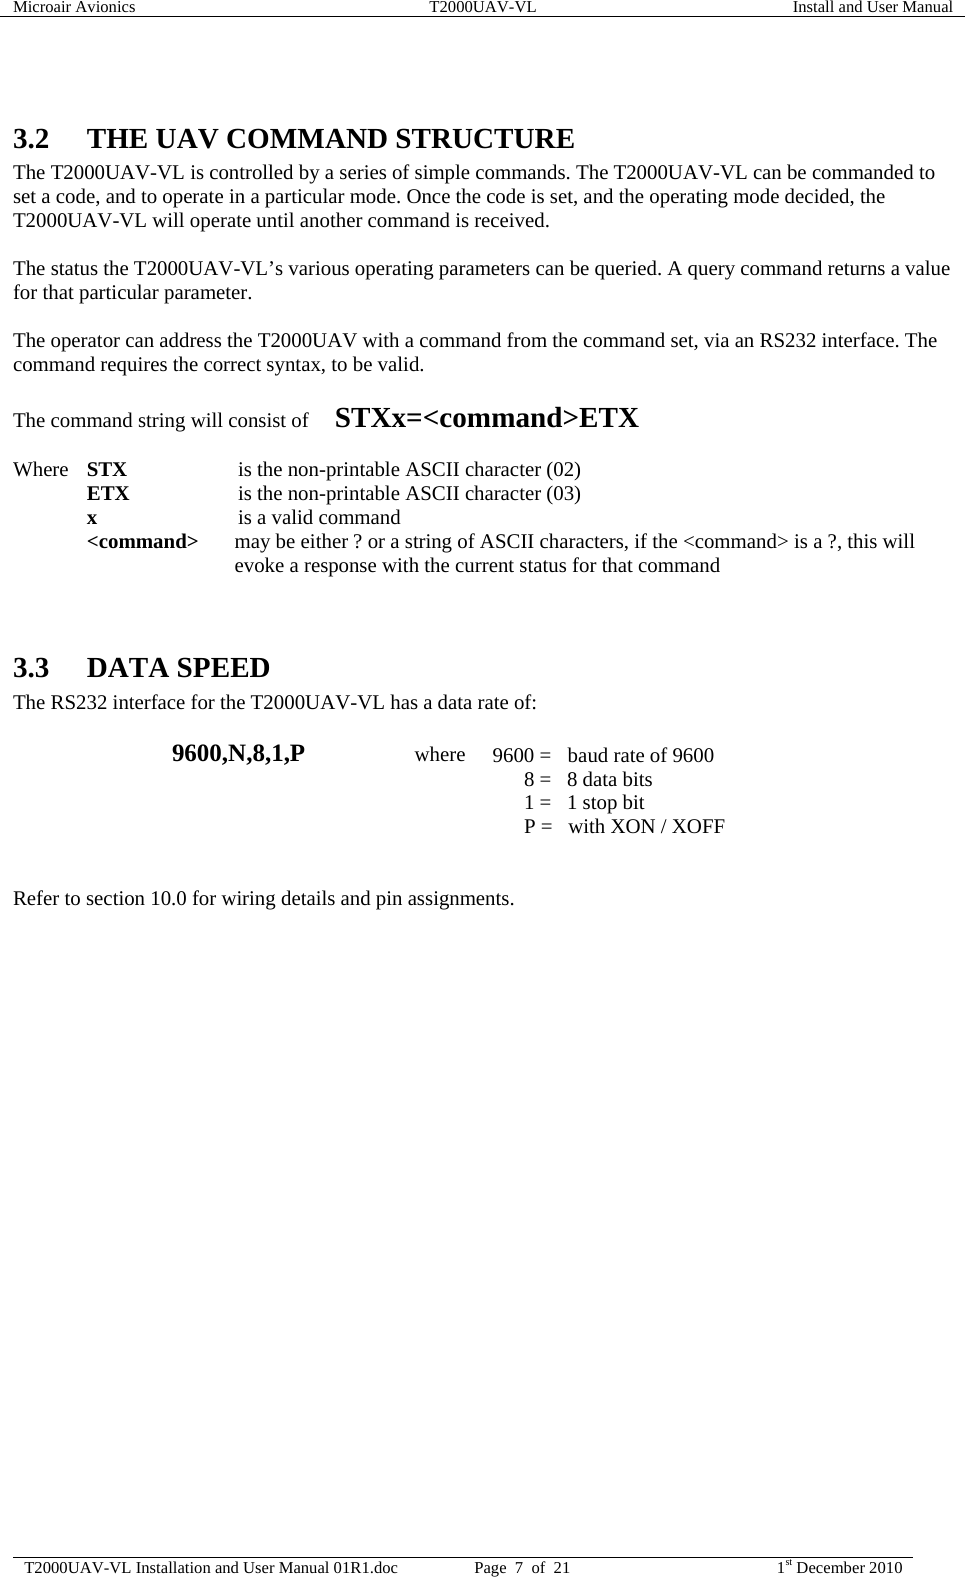 Microair Avionics  T2000UAV-VL  Install and User Manual  T2000UAV-VL Installation and User Manual 01R1.doc  Page  7  of  21  1st December 2010   3.2 THE UAV COMMAND STRUCTURE The T2000UAV-VL is controlled by a series of simple commands. The T2000UAV-VL can be commanded to set a code, and to operate in a particular mode. Once the code is set, and the operating mode decided, the T2000UAV-VL will operate until another command is received.  The status the T2000UAV-VL’s various operating parameters can be queried. A query command returns a value for that particular parameter.  The operator can address the T2000UAV with a command from the command set, via an RS232 interface. The command requires the correct syntax, to be valid.   The command string will consist of     STXx=&lt;command&gt;ETX   Where STX   is the non-printable ASCII character (02)  ETX   is the non-printable ASCII character (03)  x   is a valid command  &lt;command&gt;  may be either ? or a string of ASCII characters, if the &lt;command&gt; is a ?, this will evoke a response with the current status for that command   3.3 DATA SPEED The RS232 interface for the T2000UAV-VL has a data rate of:   9600,N,8,1,P                     where  9600 =  baud rate of 9600           8 =   8 data bits           1 =   1 stop bit           P =   with XON / XOFF   Refer to section 10.0 for wiring details and pin assignments.